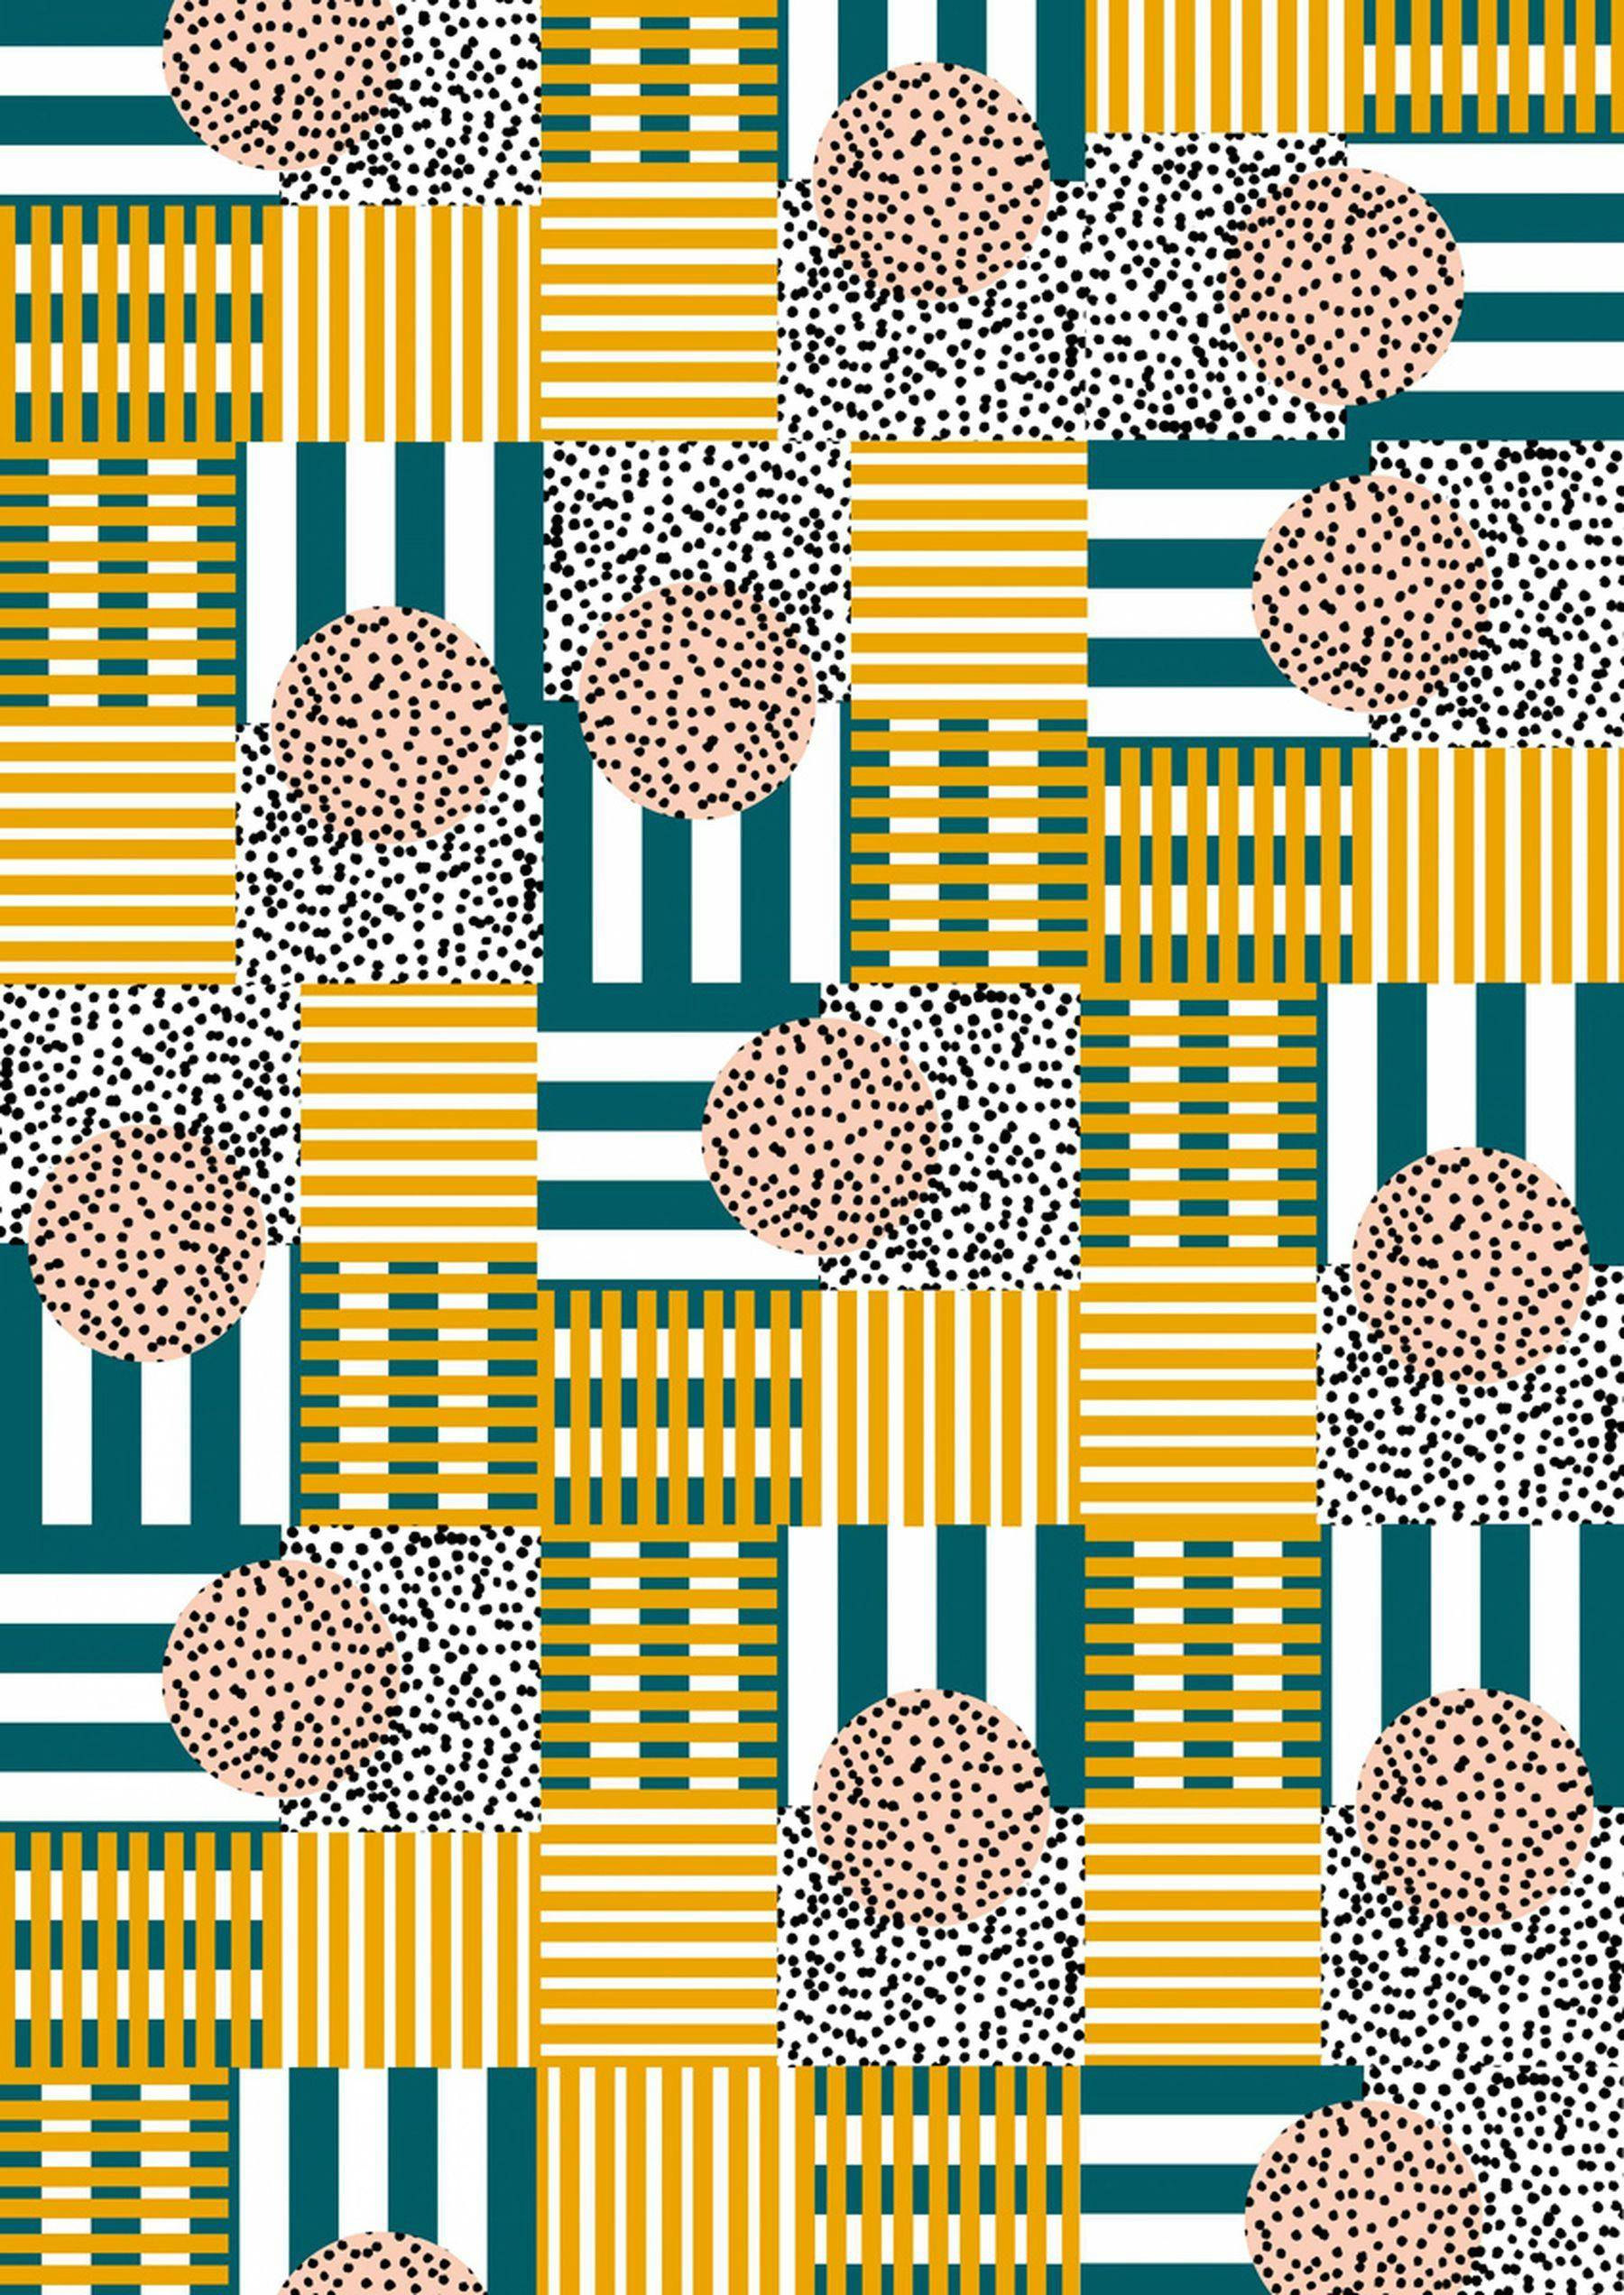 A digital illustration of a geometric pattern of different squares with vertical and horizontal lines and circles consisting of polka dots. Colours include oranges, greens, white and blacks.